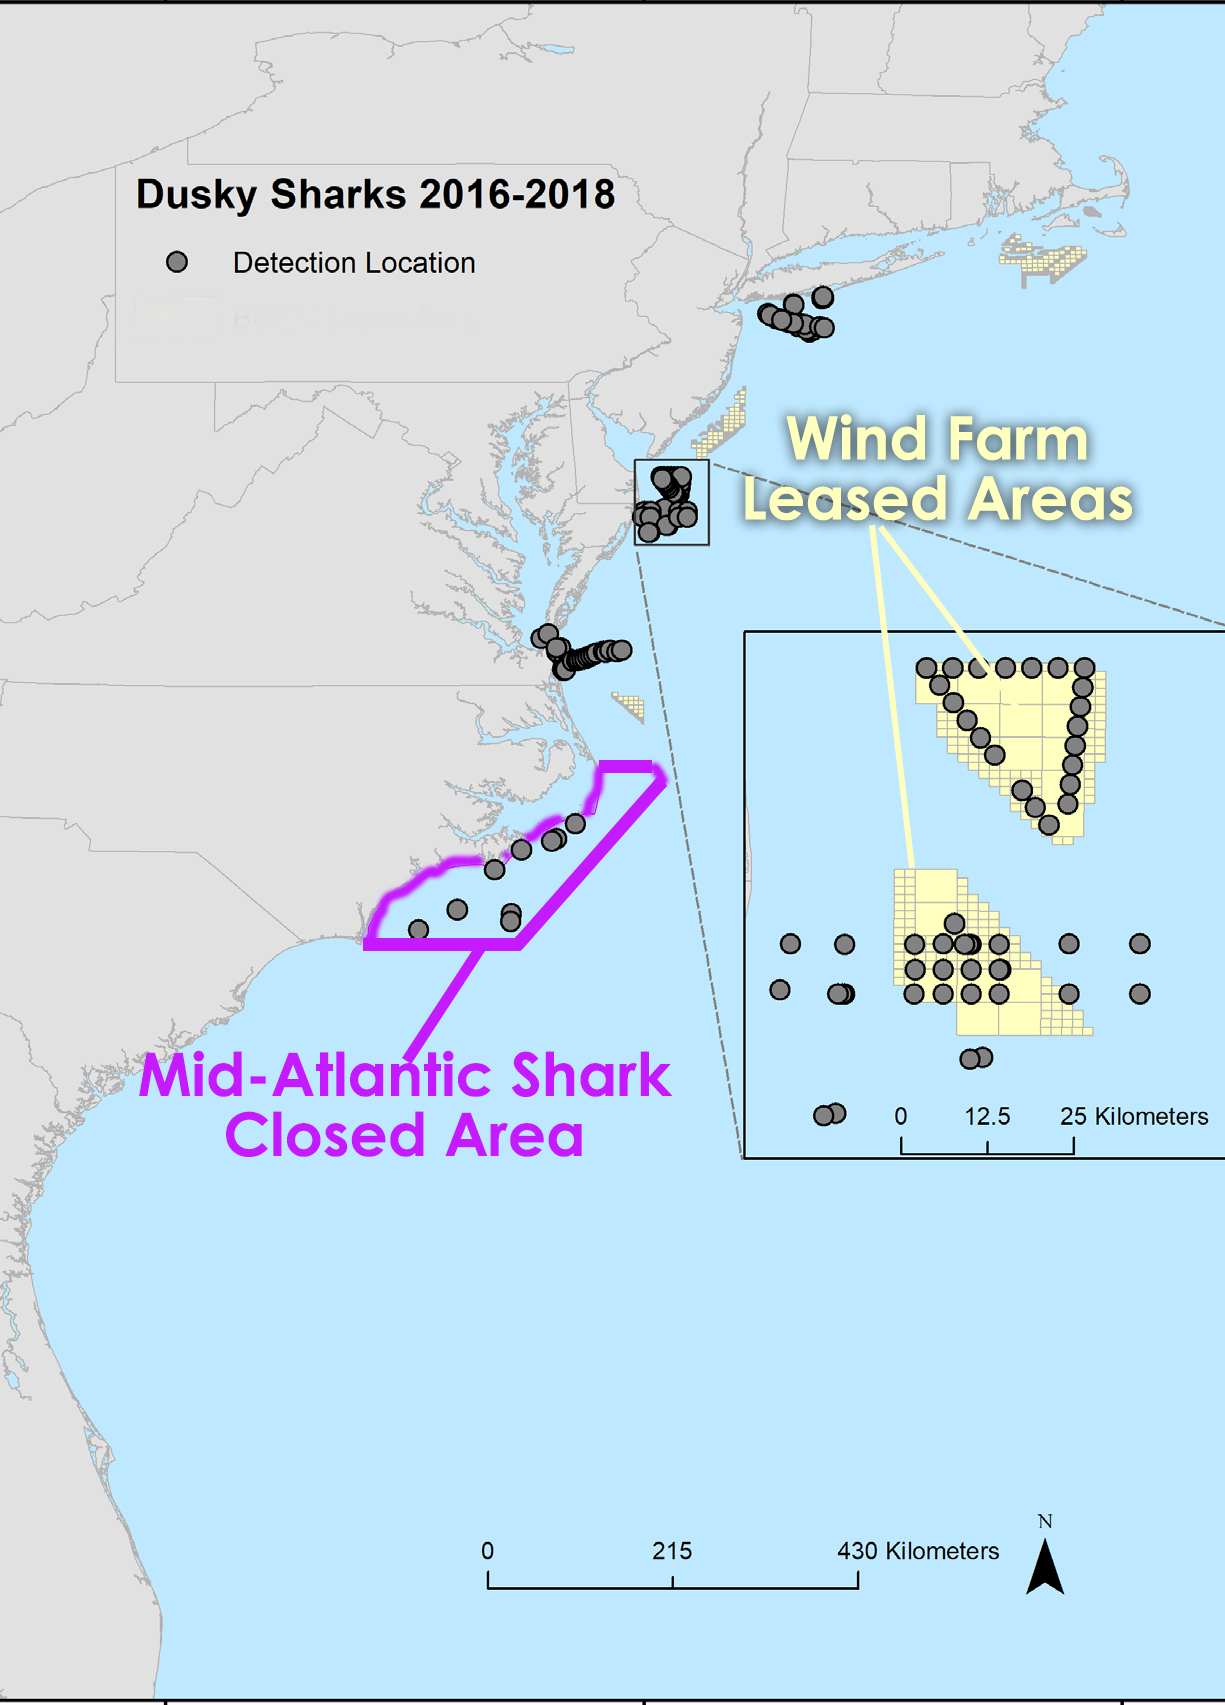 Map of U.S. East coast with purple border for Mid-Atlantic Shark Closed Area and yellow regions leased for offshore wind farms